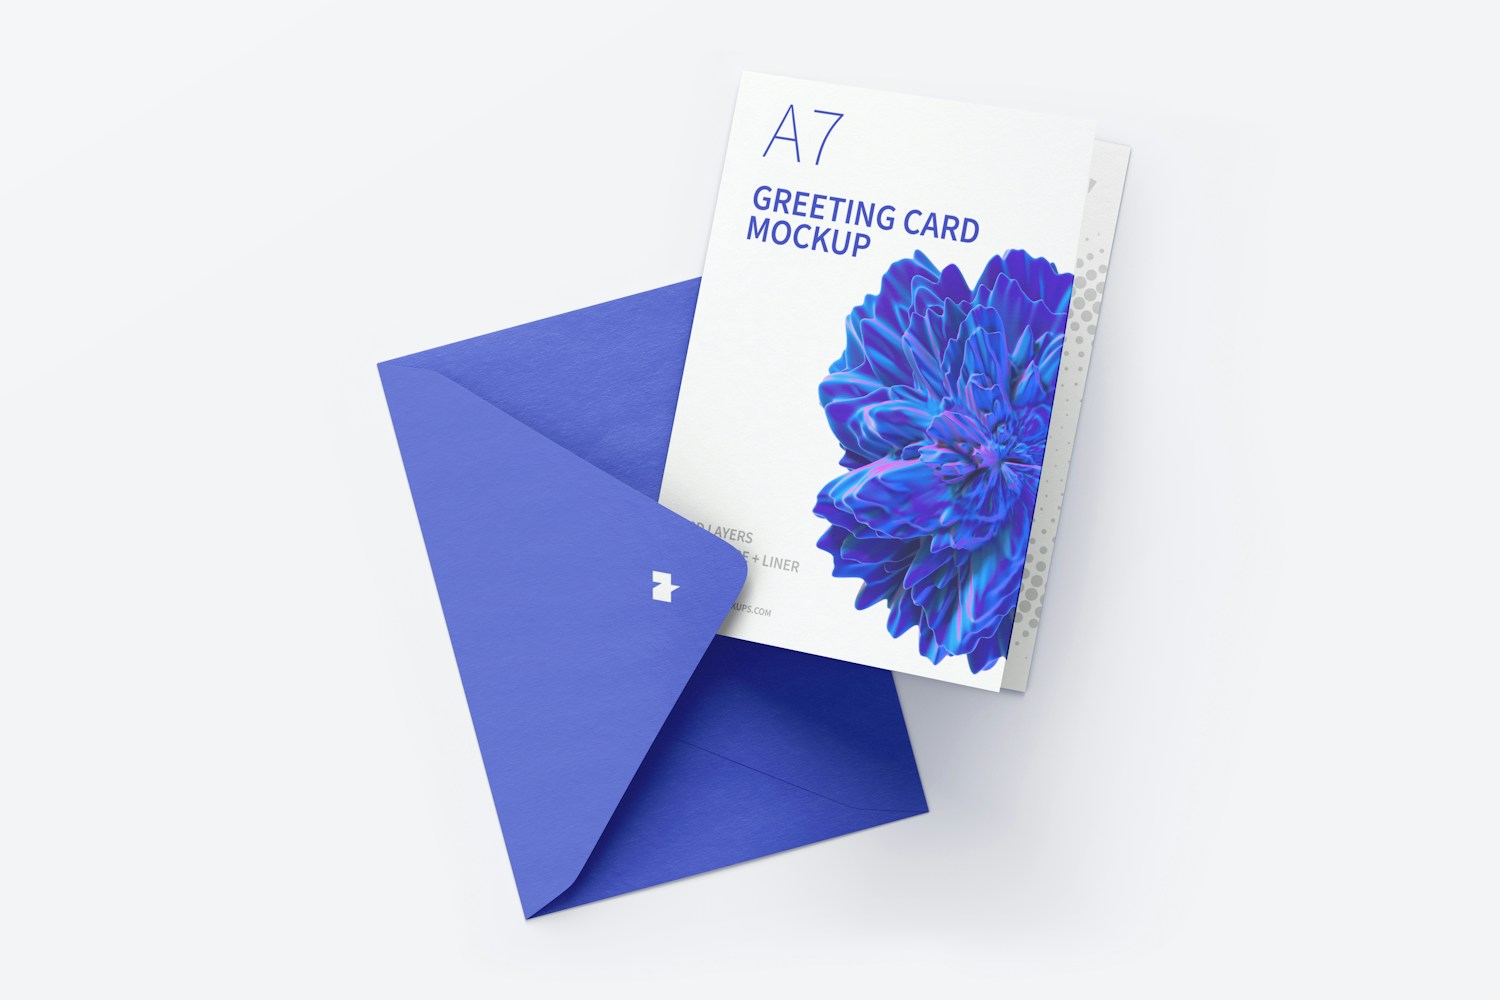 Portrait A7 Greeting Card Mockup with Envelope, Top View